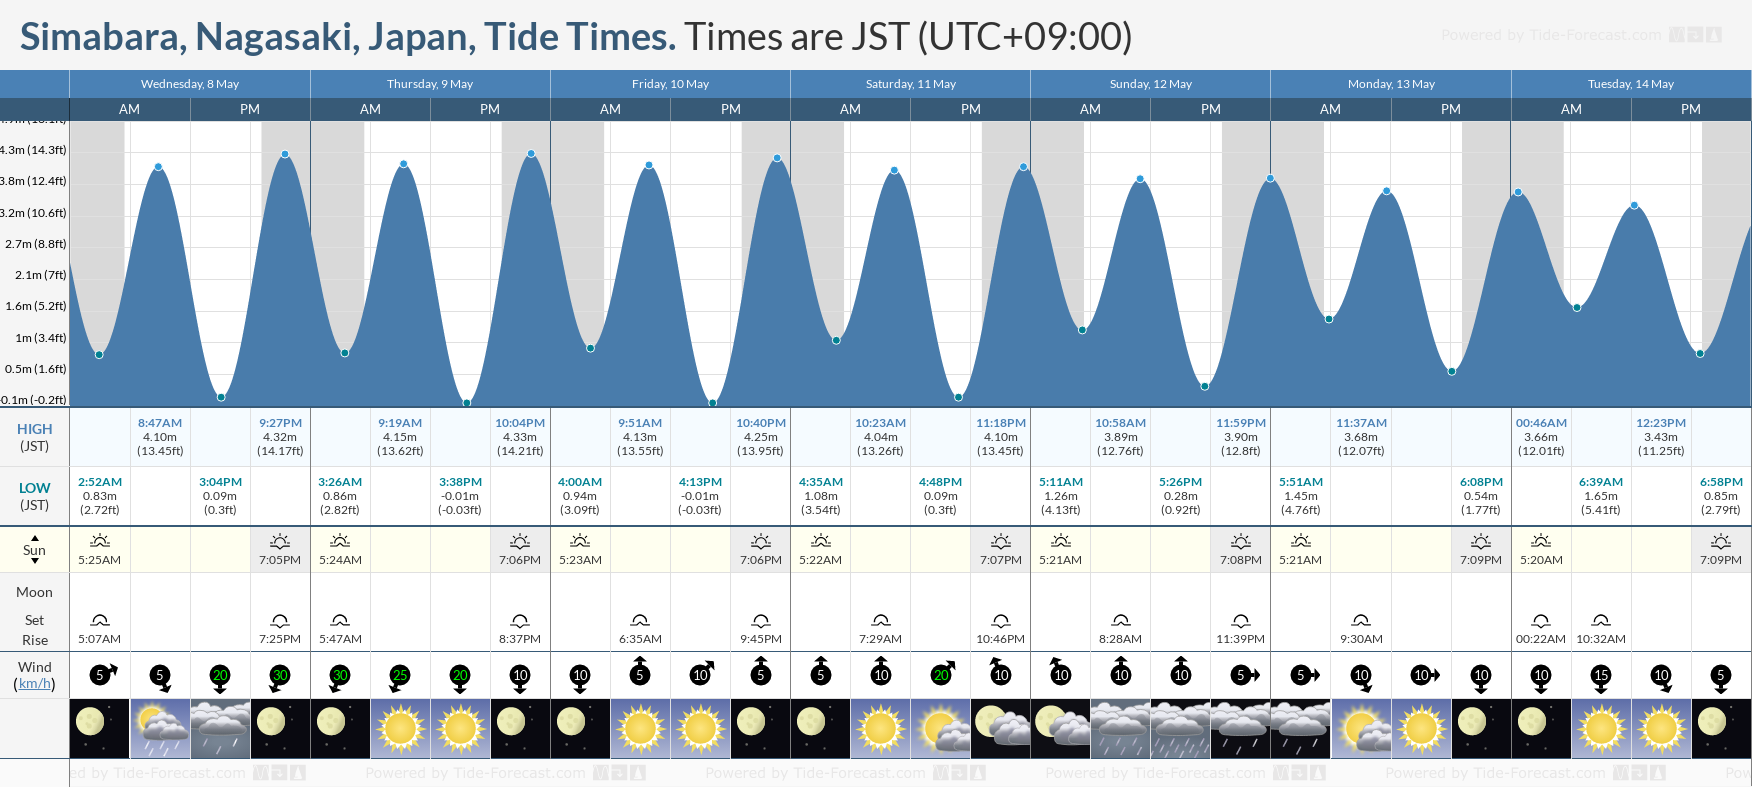 Simabara, Nagasaki, Japan Tide Chart including high and low tide times for the next 7 days